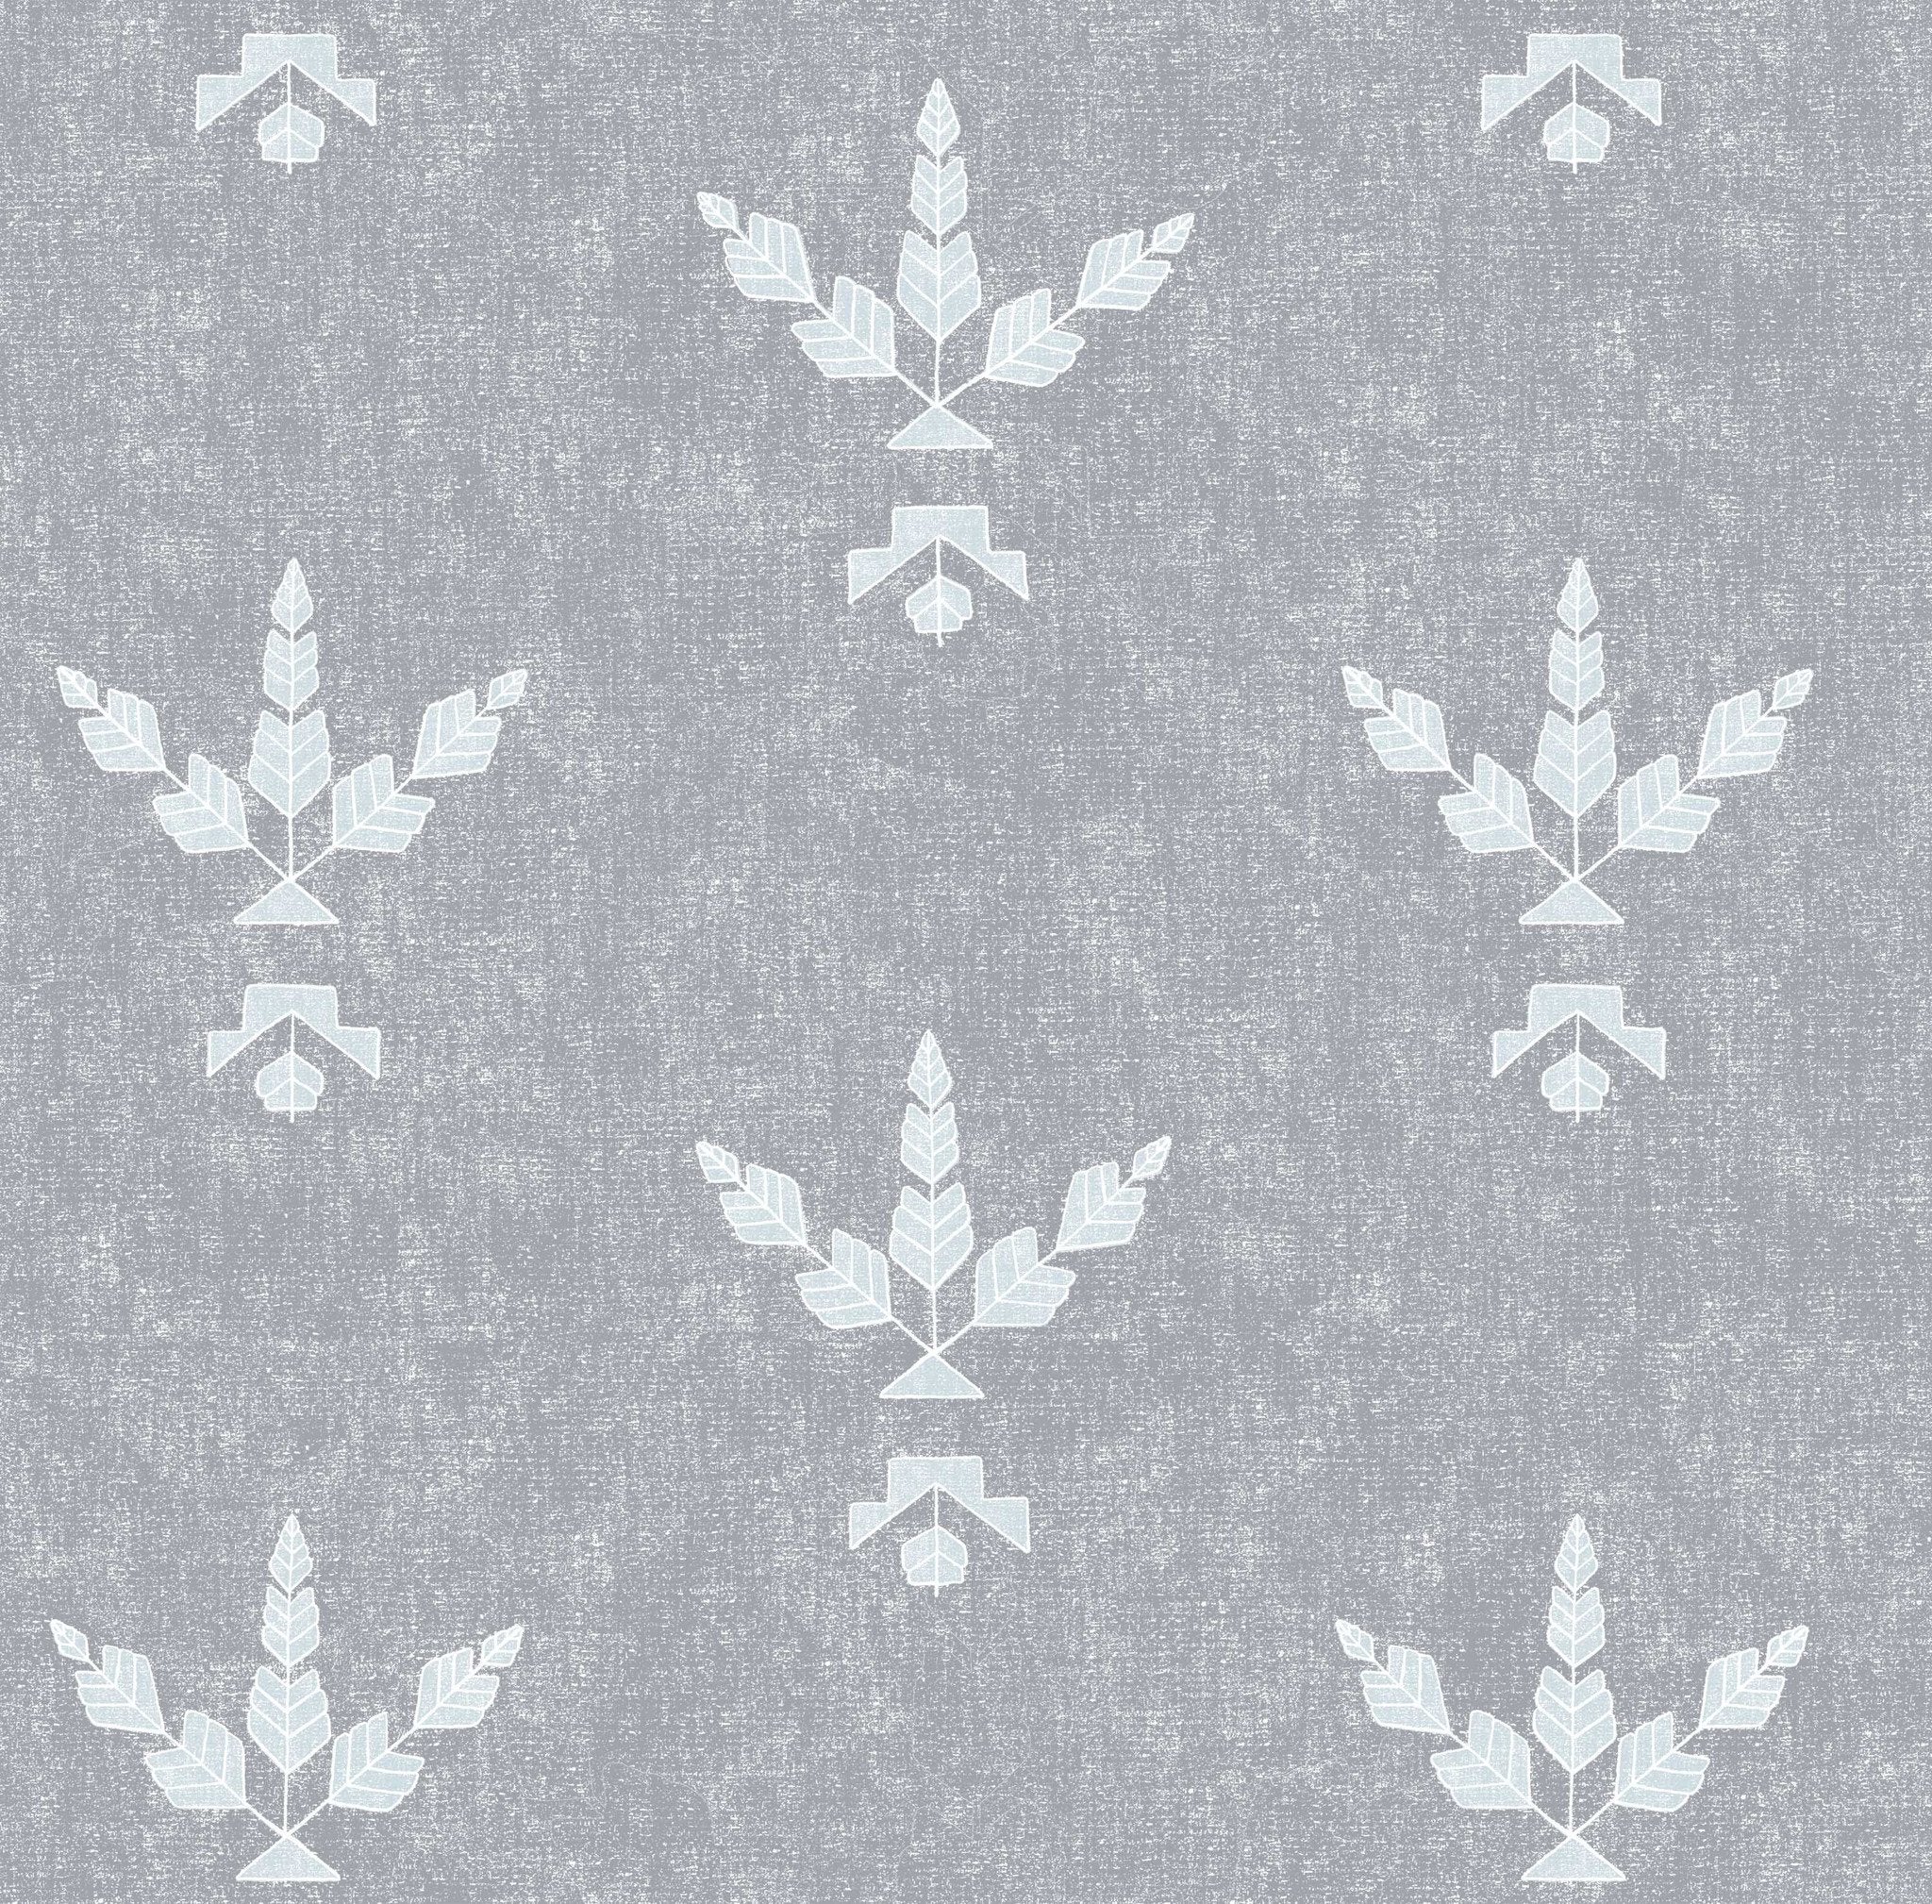 A mid grey linen fabric with white maple leaf pattern and repeating geometric pattern - Silver